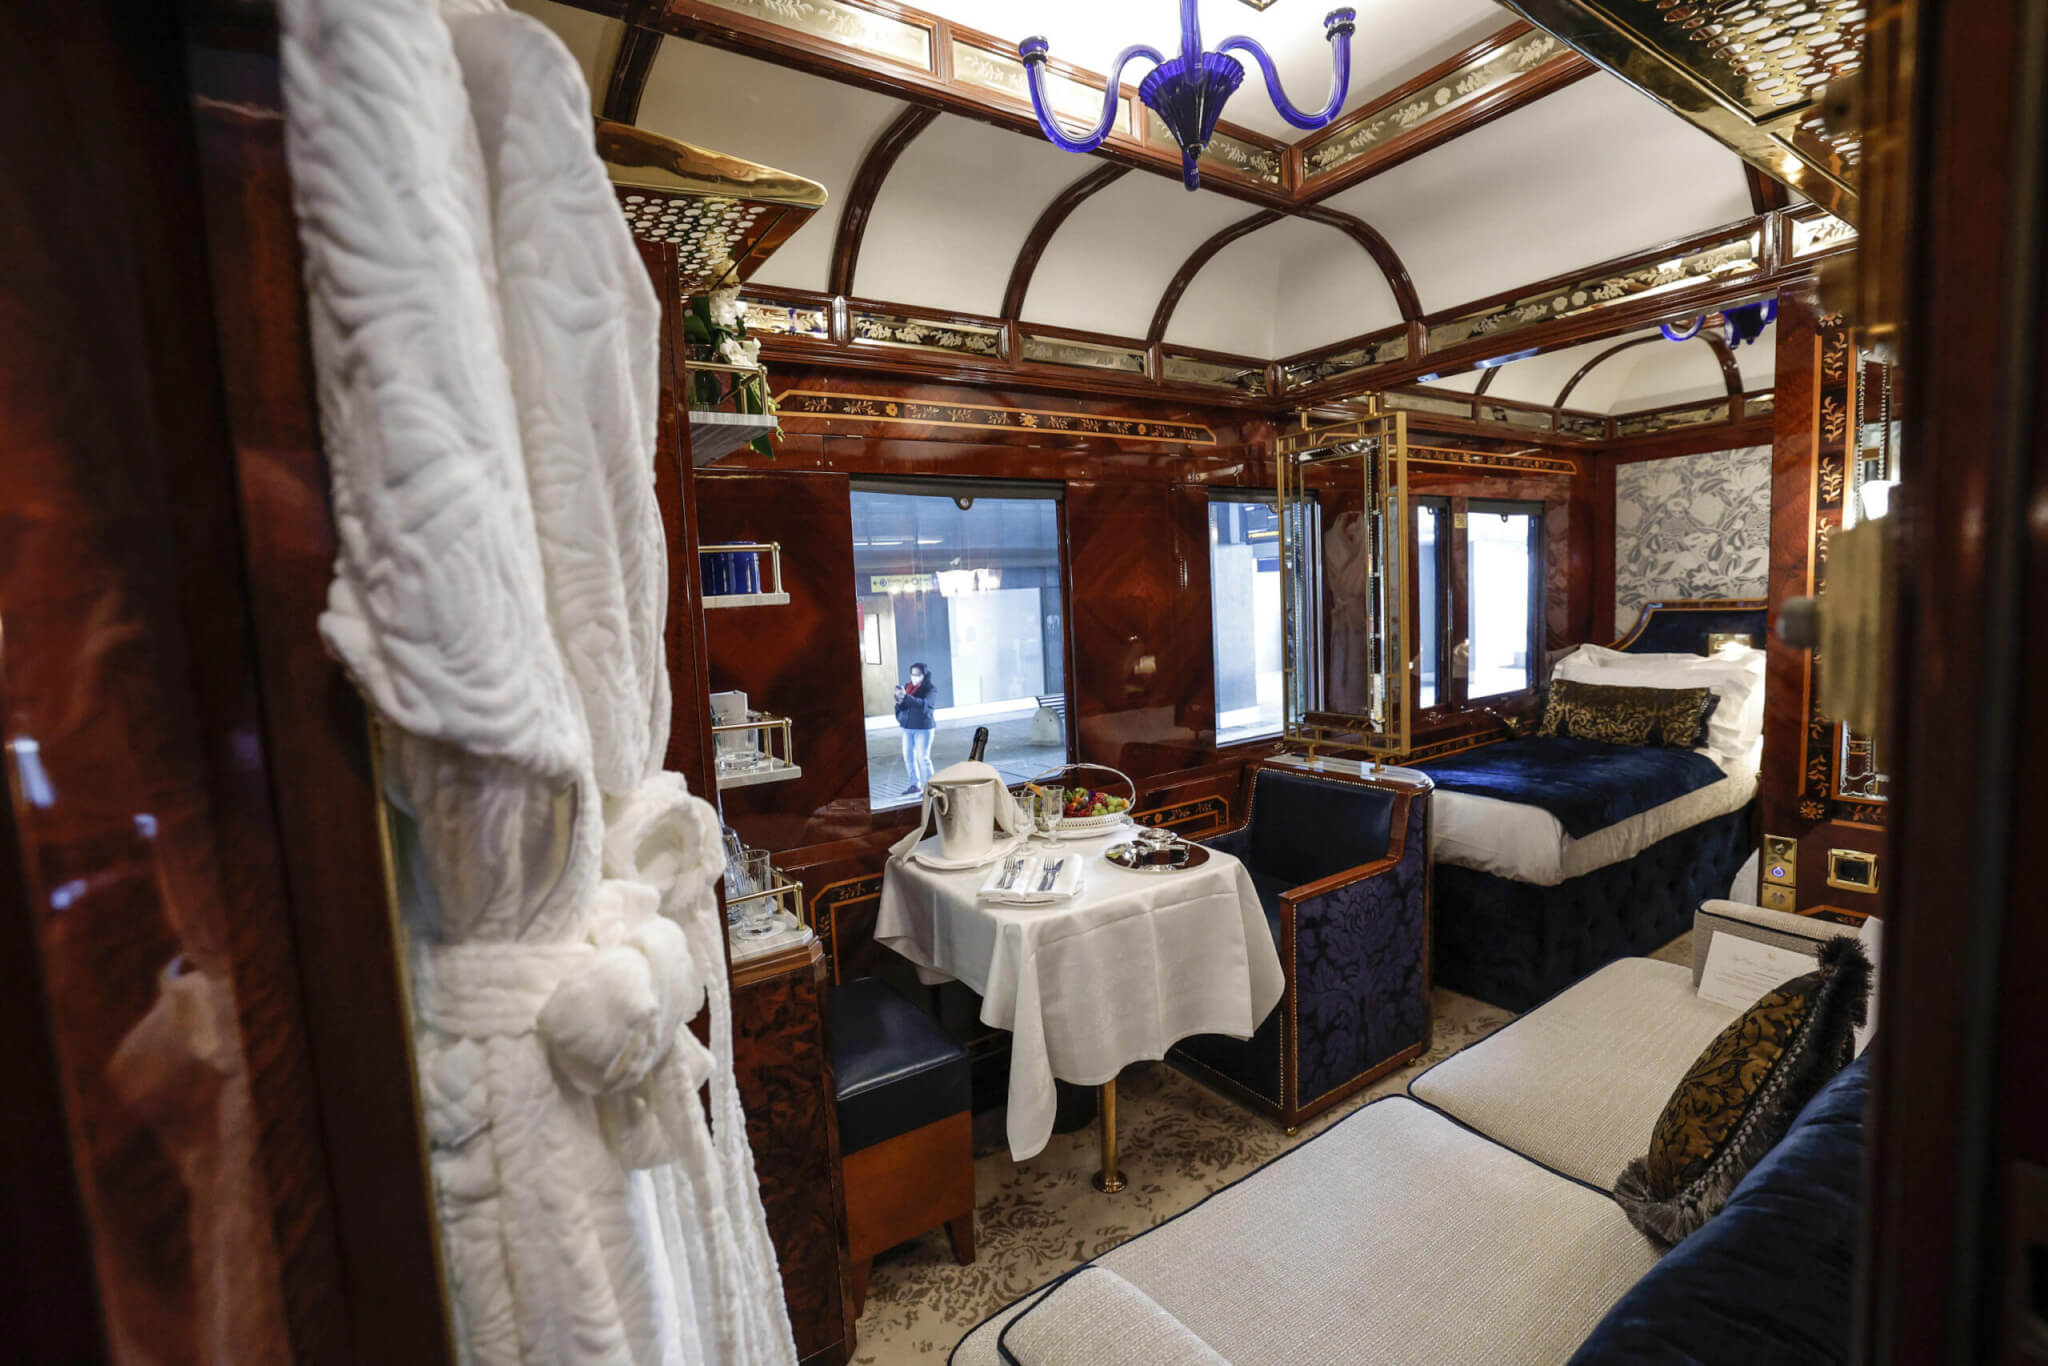 Interior of the Venice Simplon Orient Express (VSOE) arrives at Rome Tiburtina railway station, in Rome, Italy, 2022. The Venice Simplon Orient Express a privately-run train of restored original 1920s, 30s and 50s carriages with Art Deco decor. The train connects a number of European cities, such as London, Paris, Innsbruck, Verona, Venice and Rome.